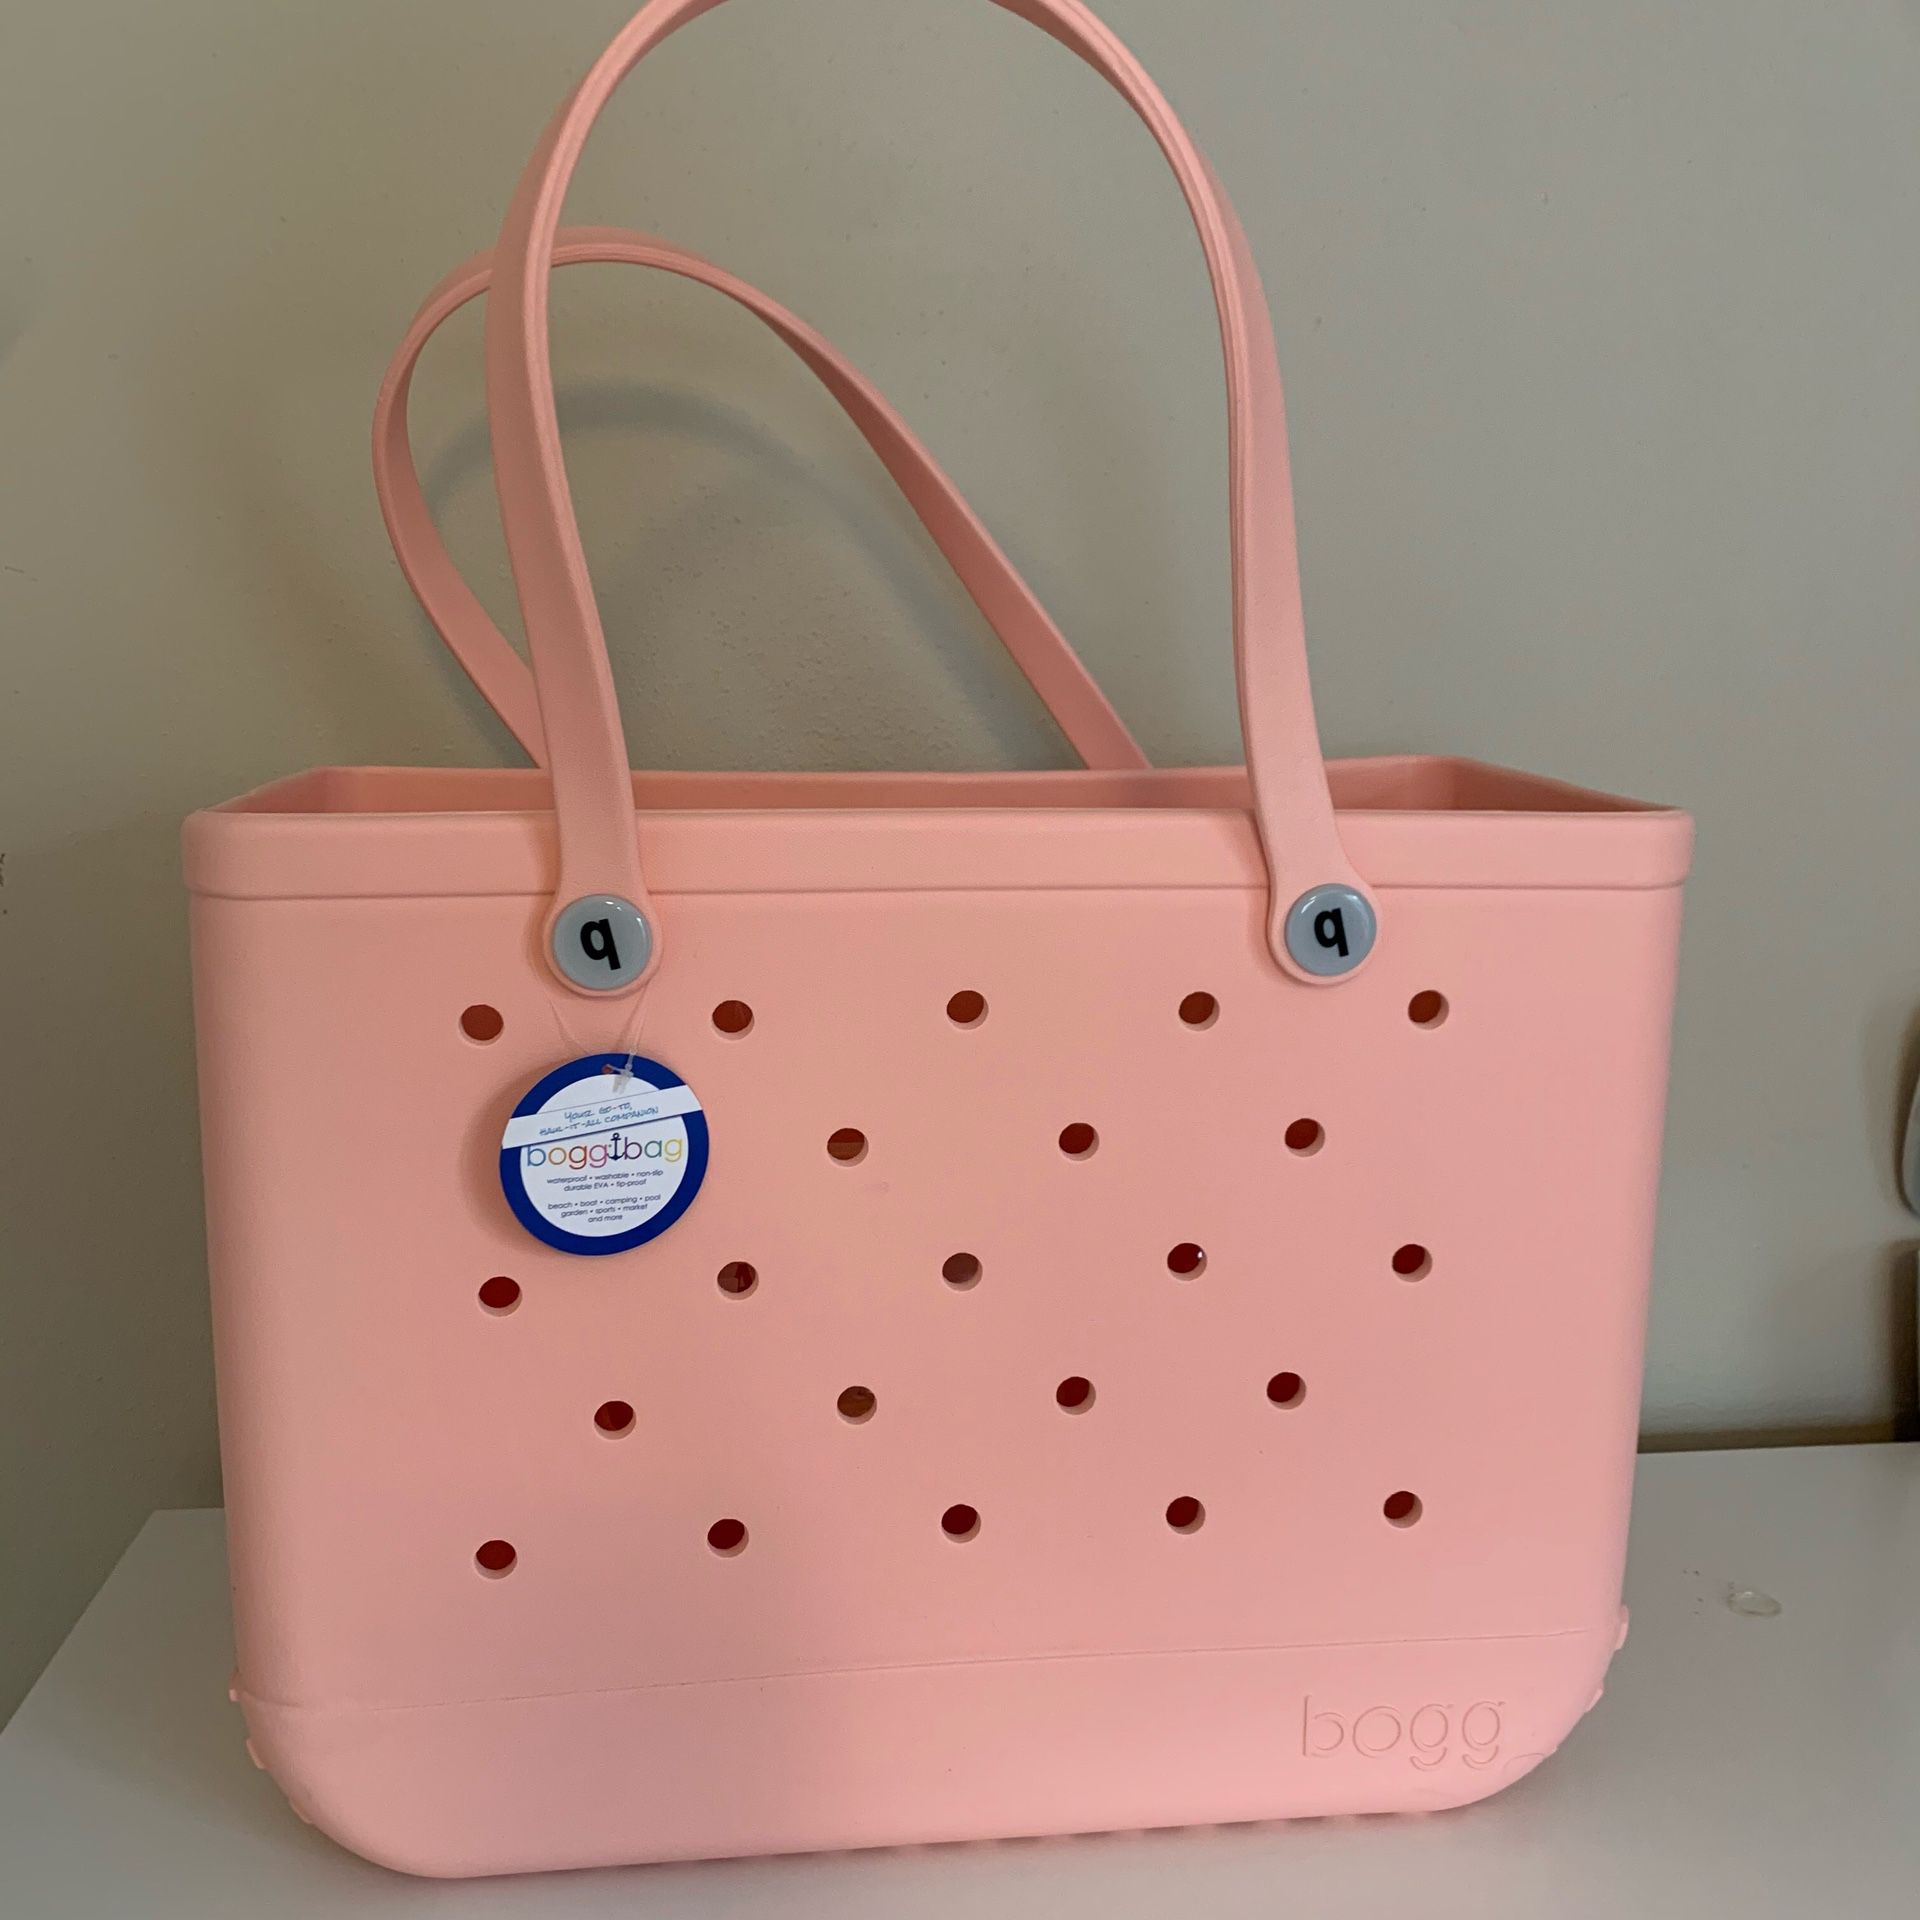 Bogg Bag Large Peach new With Tags for Sale in Orlando, FL